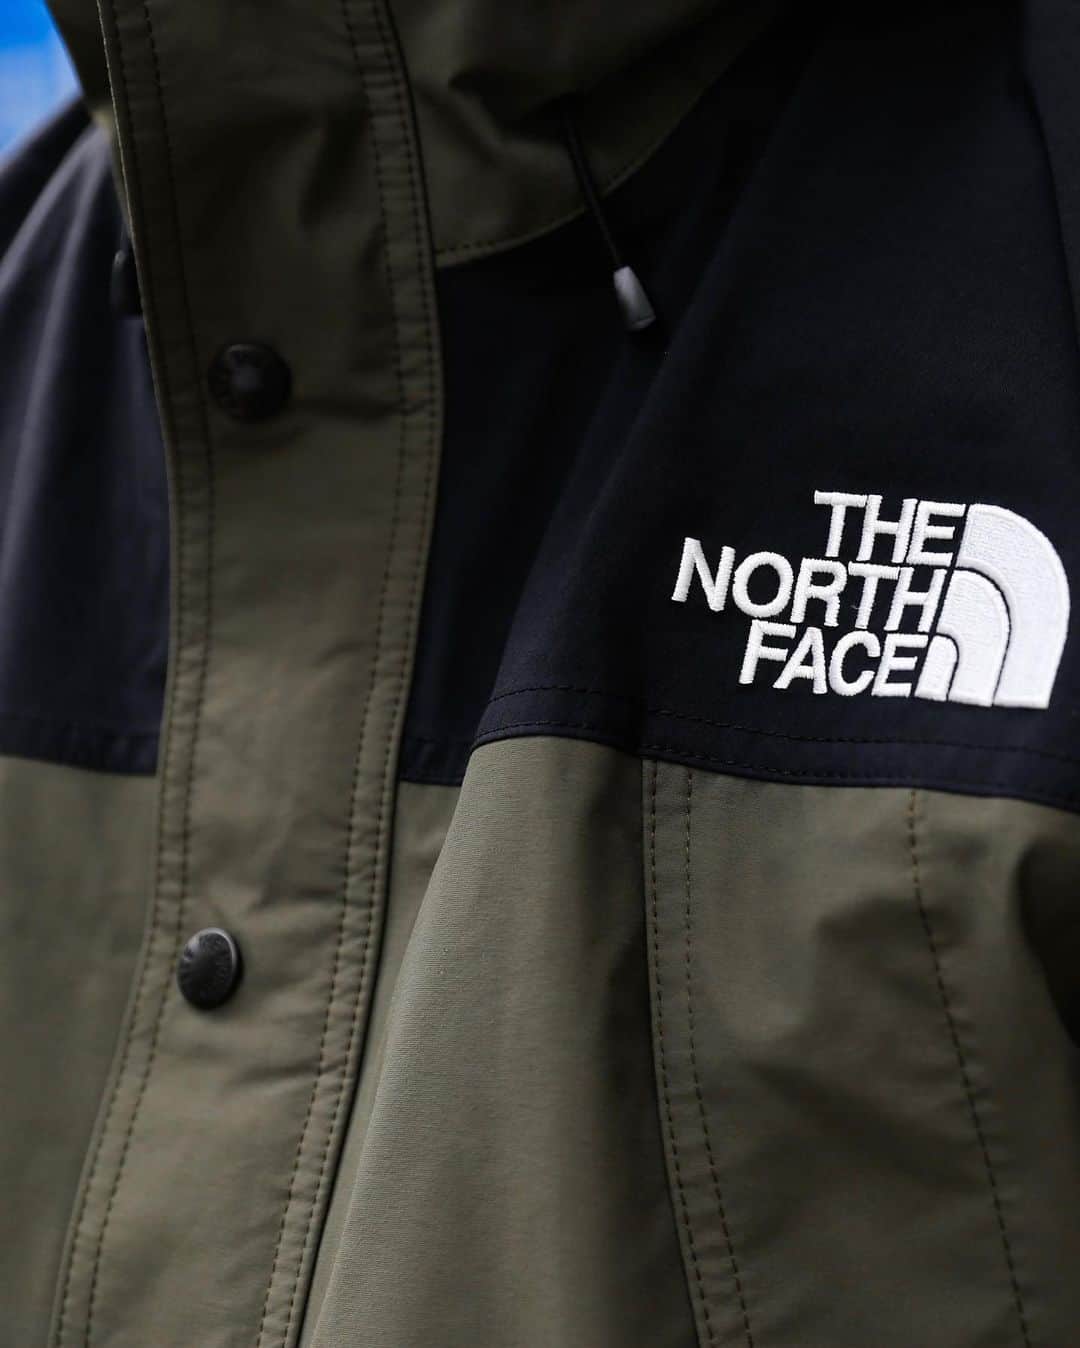 アトモスさんのインスタグラム写真 - (アトモスInstagram)「. 10/9(FRI)よりTHE NORTH FACE 20FW MOUNTAIN LIGHT JACKETが登場。 GORE-TEX products2層構造を採用した防水シェルジャケット。THE NORTH FACEの定番である肩部分の切り替えを取り入れた、アイコニックなデザインです。耐久性の高い70デニールナイロンを表生地に使用し、フロントはダブルフラップ仕様で防水性を高めています。内側の専用ファスナーでインナーを連結できるジップインジップシステム対応。今回は爽やかなブルーのトランスアンタークティック、ノースフェイスの代表色のサミットゴールド、定番色のニュートープの3色展開。トレッキングやキャンプのアウトドアのみならず、デイリーユースにも適した1着です。 . ※カラーによって展開店舗が異なります。 ※詳しくはatmos-tokyo.comのRELEASE INFOをご確認ください。 . THE NORTH FACE MOUNTAIN LIGHT JACKET 20FW will be released from 10/9 (FRI). GORE-TEX products Waterproof shell jacket with a two-layer structure. It is an iconic design that incorporates the standard shoulder switching of THE NORTH FACE. Durable 70 denier nylon is used for the outer fabric, and the front has a double flap design to improve waterproofness. Compatible with the zip-in zip system that allows you to connect the inner with a special zipper on the inside. This time, three colors are available: the refreshing blue transantactic, the North Face masterpiece summit gold, and the classic new taupe. It is suitable not only for trekking and camping outdoors, but also for daily use. * Available stores vary depending on the color. * For details, please see RELEASE INFO on atmos-tokyo.com. . #atmos #atmostokyo #atmosjapan #thenorthface #northface #mountainlight #アトモス #ノースフェイス」10月8日 13時47分 - atmos_japan